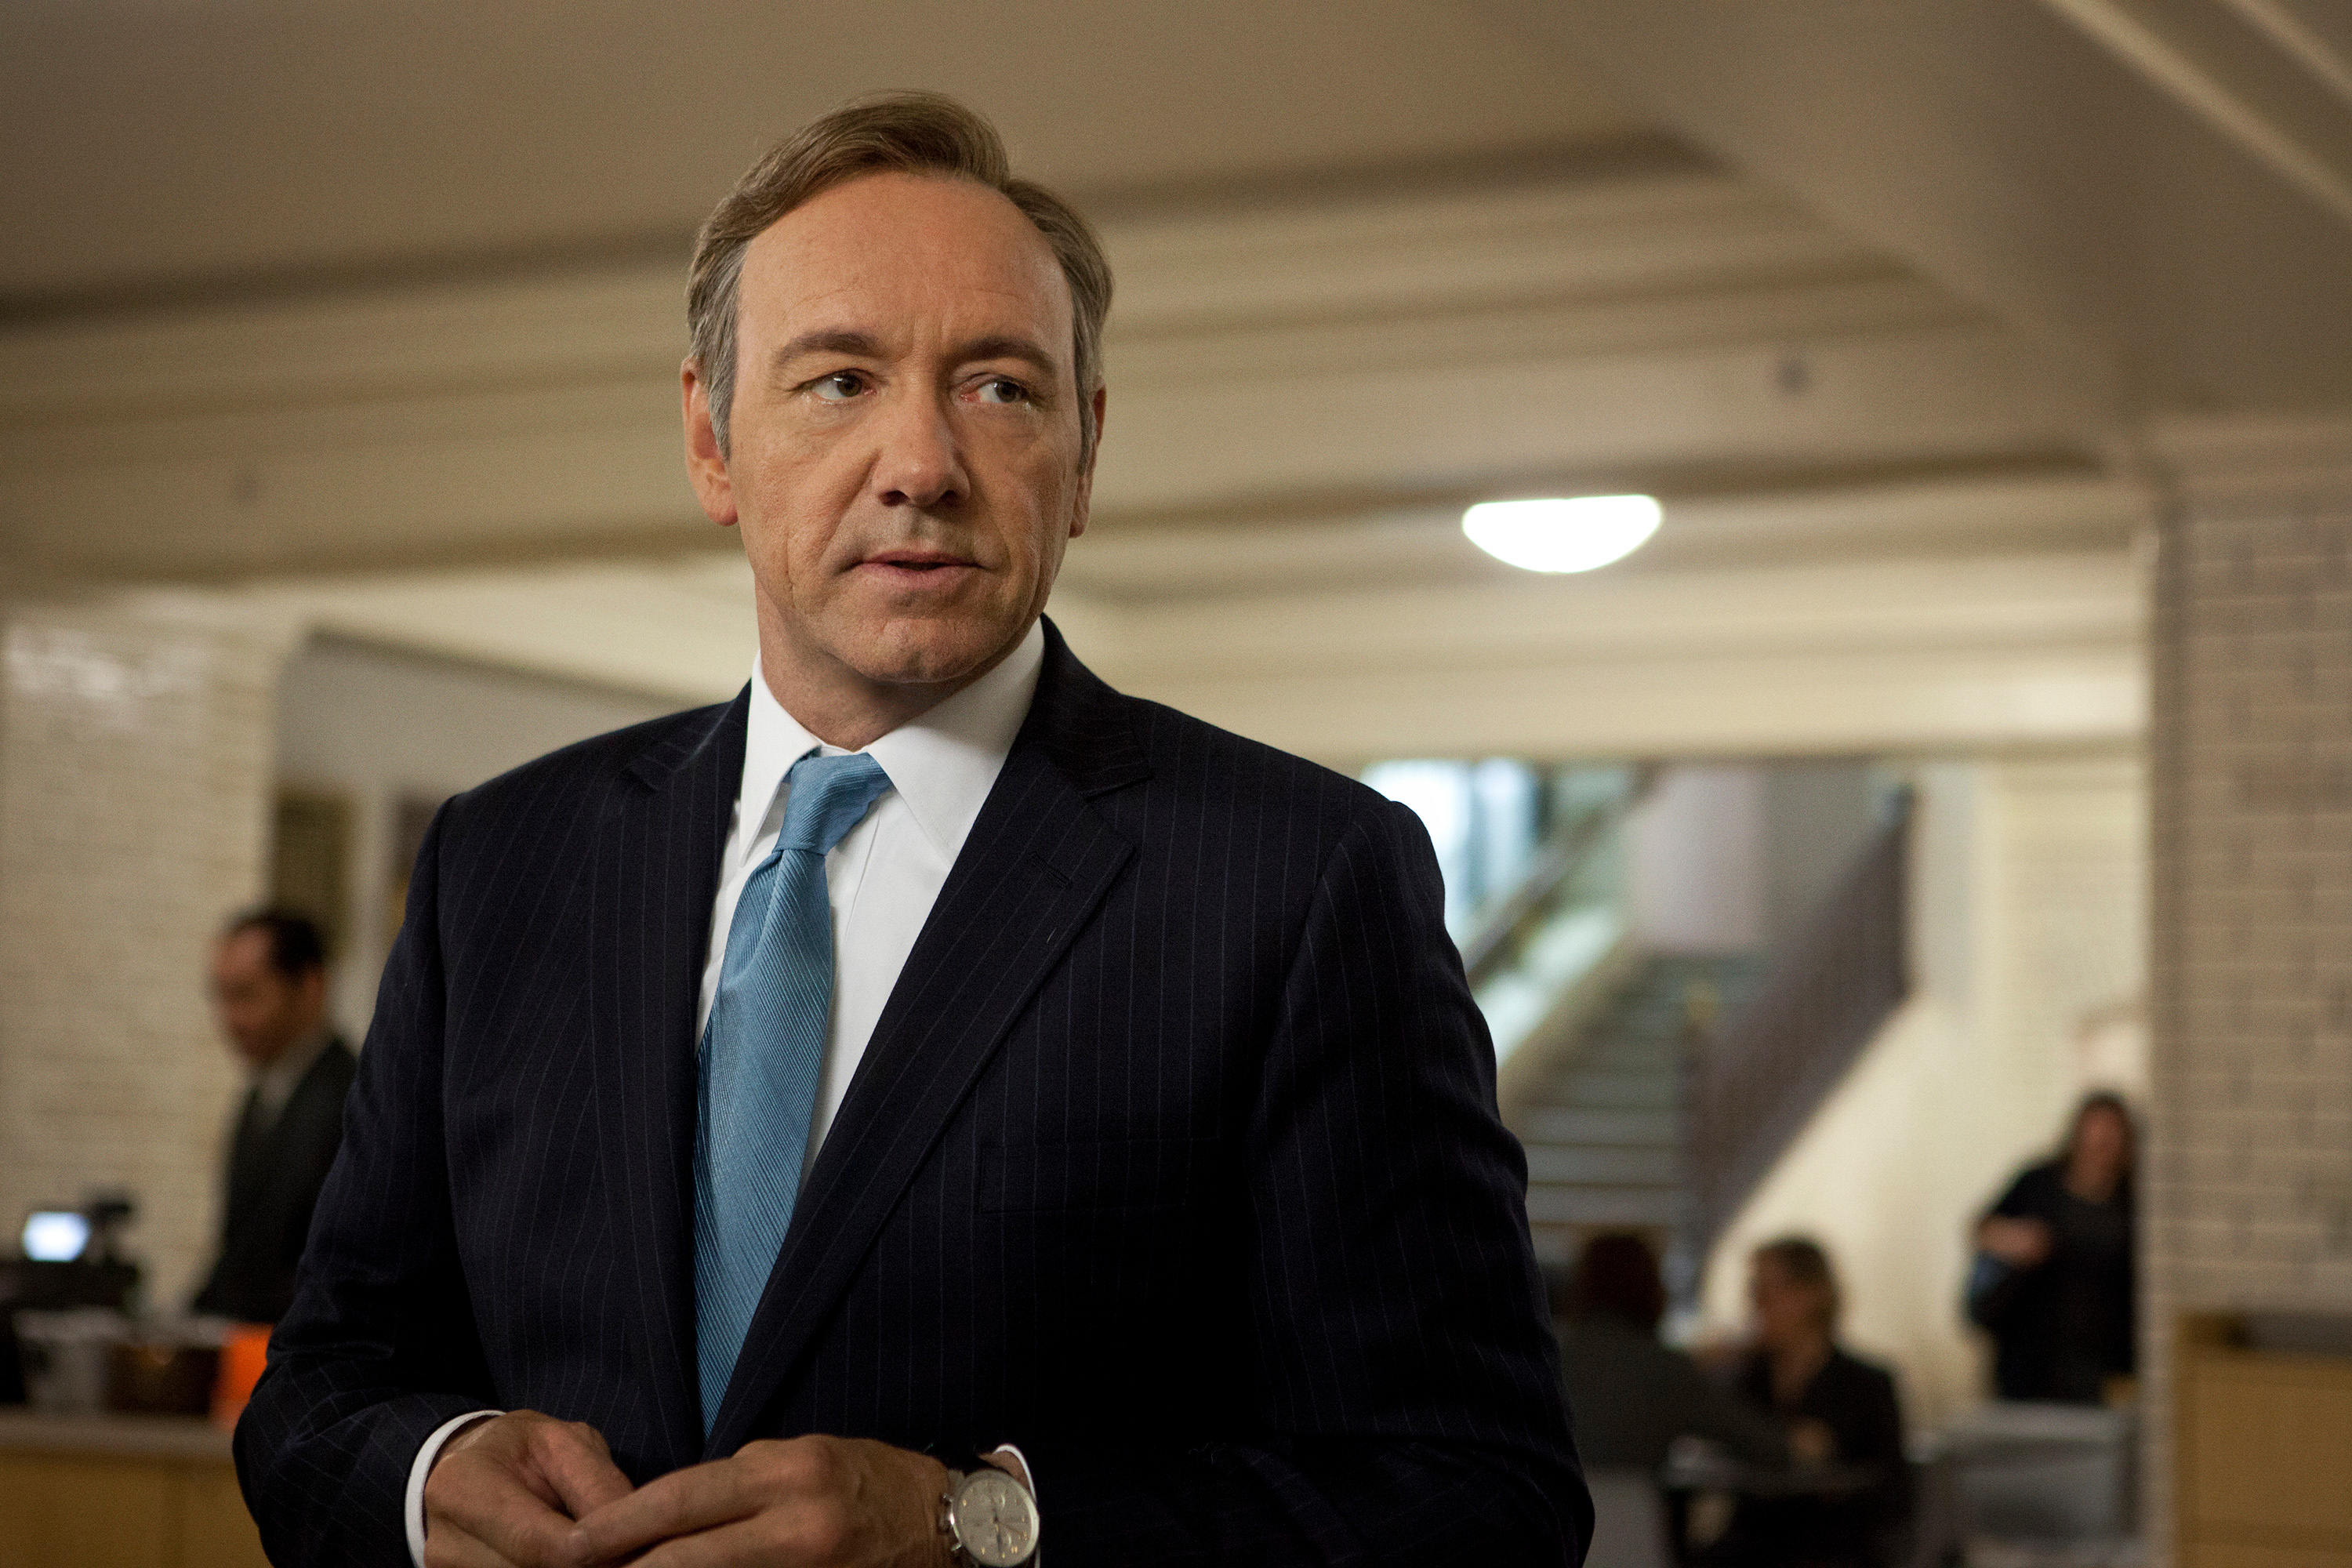 Newsworthy Netflix: Red Carpet Premiere of “House of Cards”